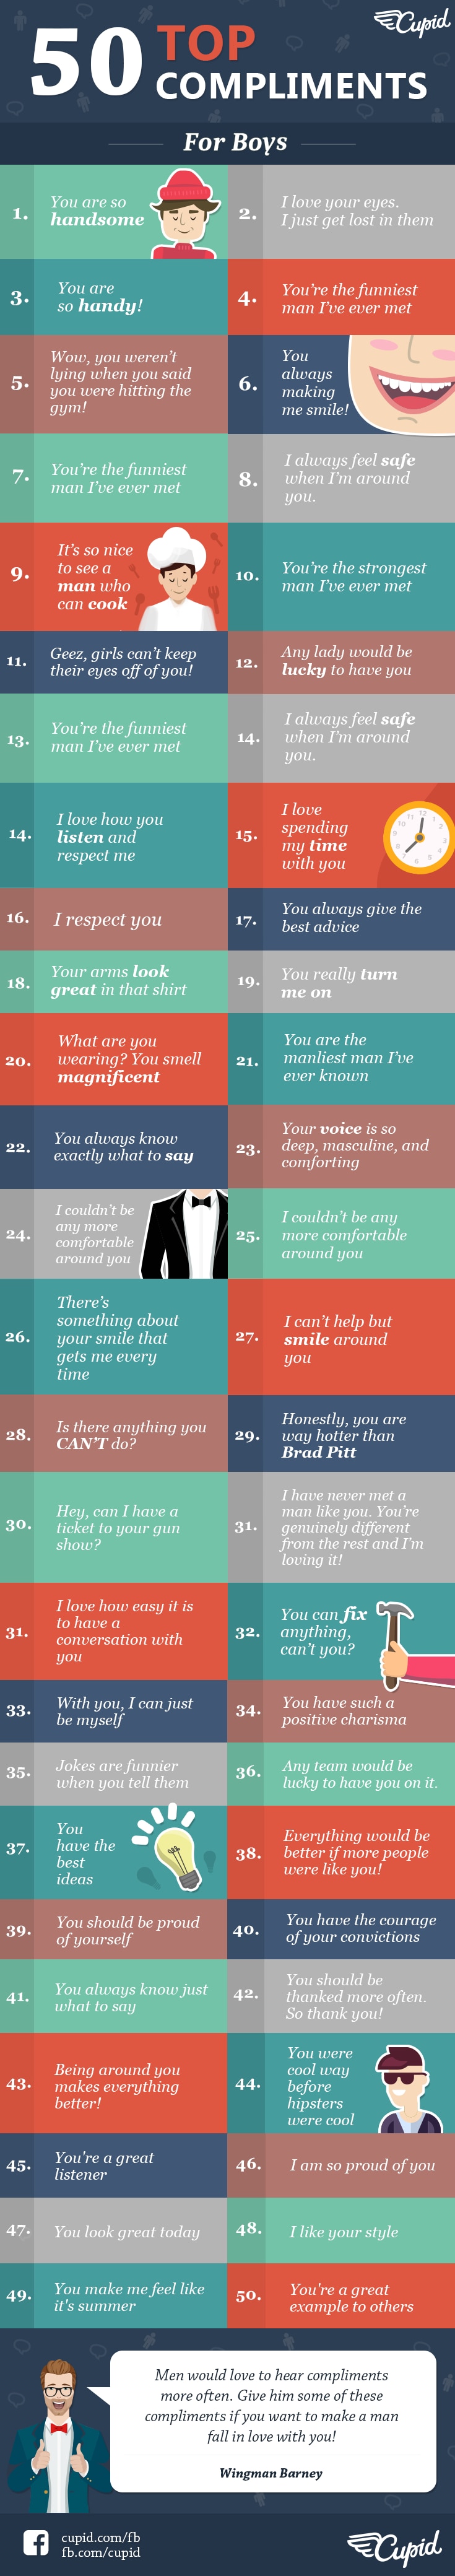 Compliments for Men Infographic